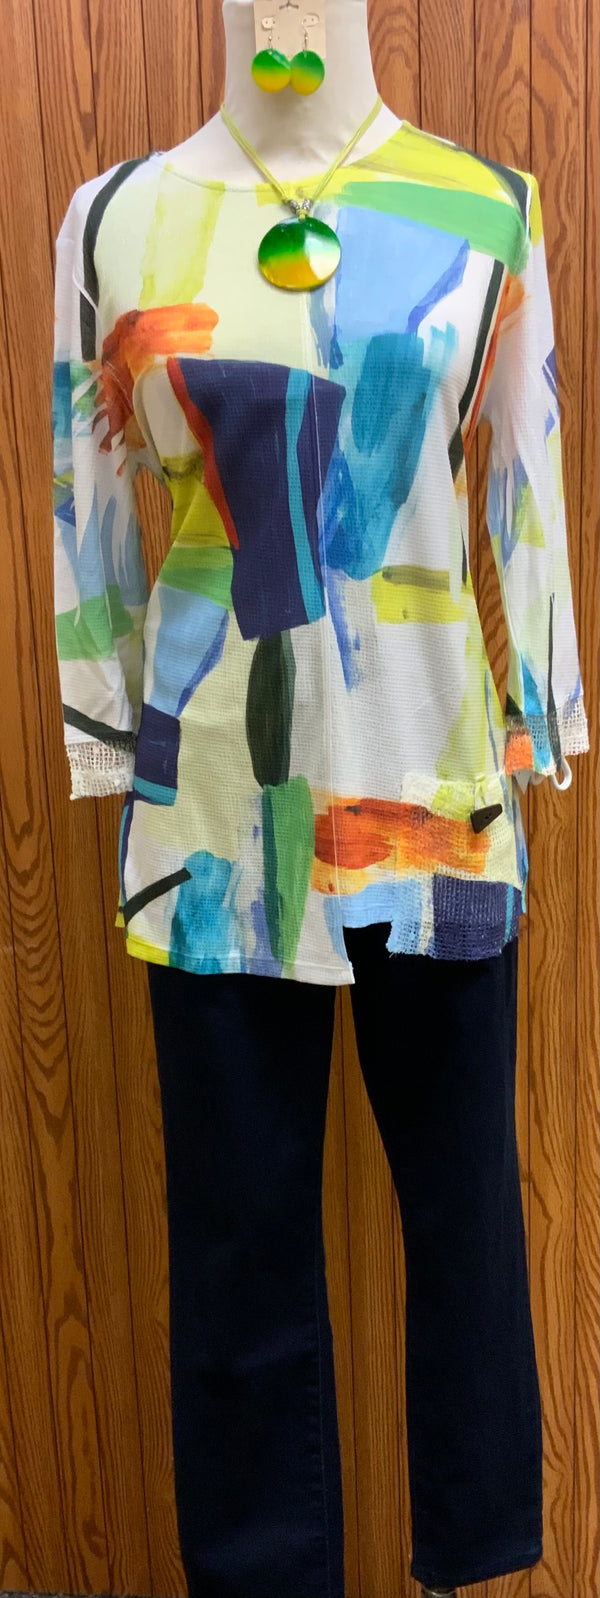 Susan Watercolor Top | Crafted from a textured crepe fabric and printed with a dreamy watercolor design, this top is perfect for a day out shopping or a night on the town. It even has a unique mesh pocket on the left hip and a mesh trim on the sleeves to add an extra dose of originality.   Machine washable   Made in the USA  Available Small - 3X 